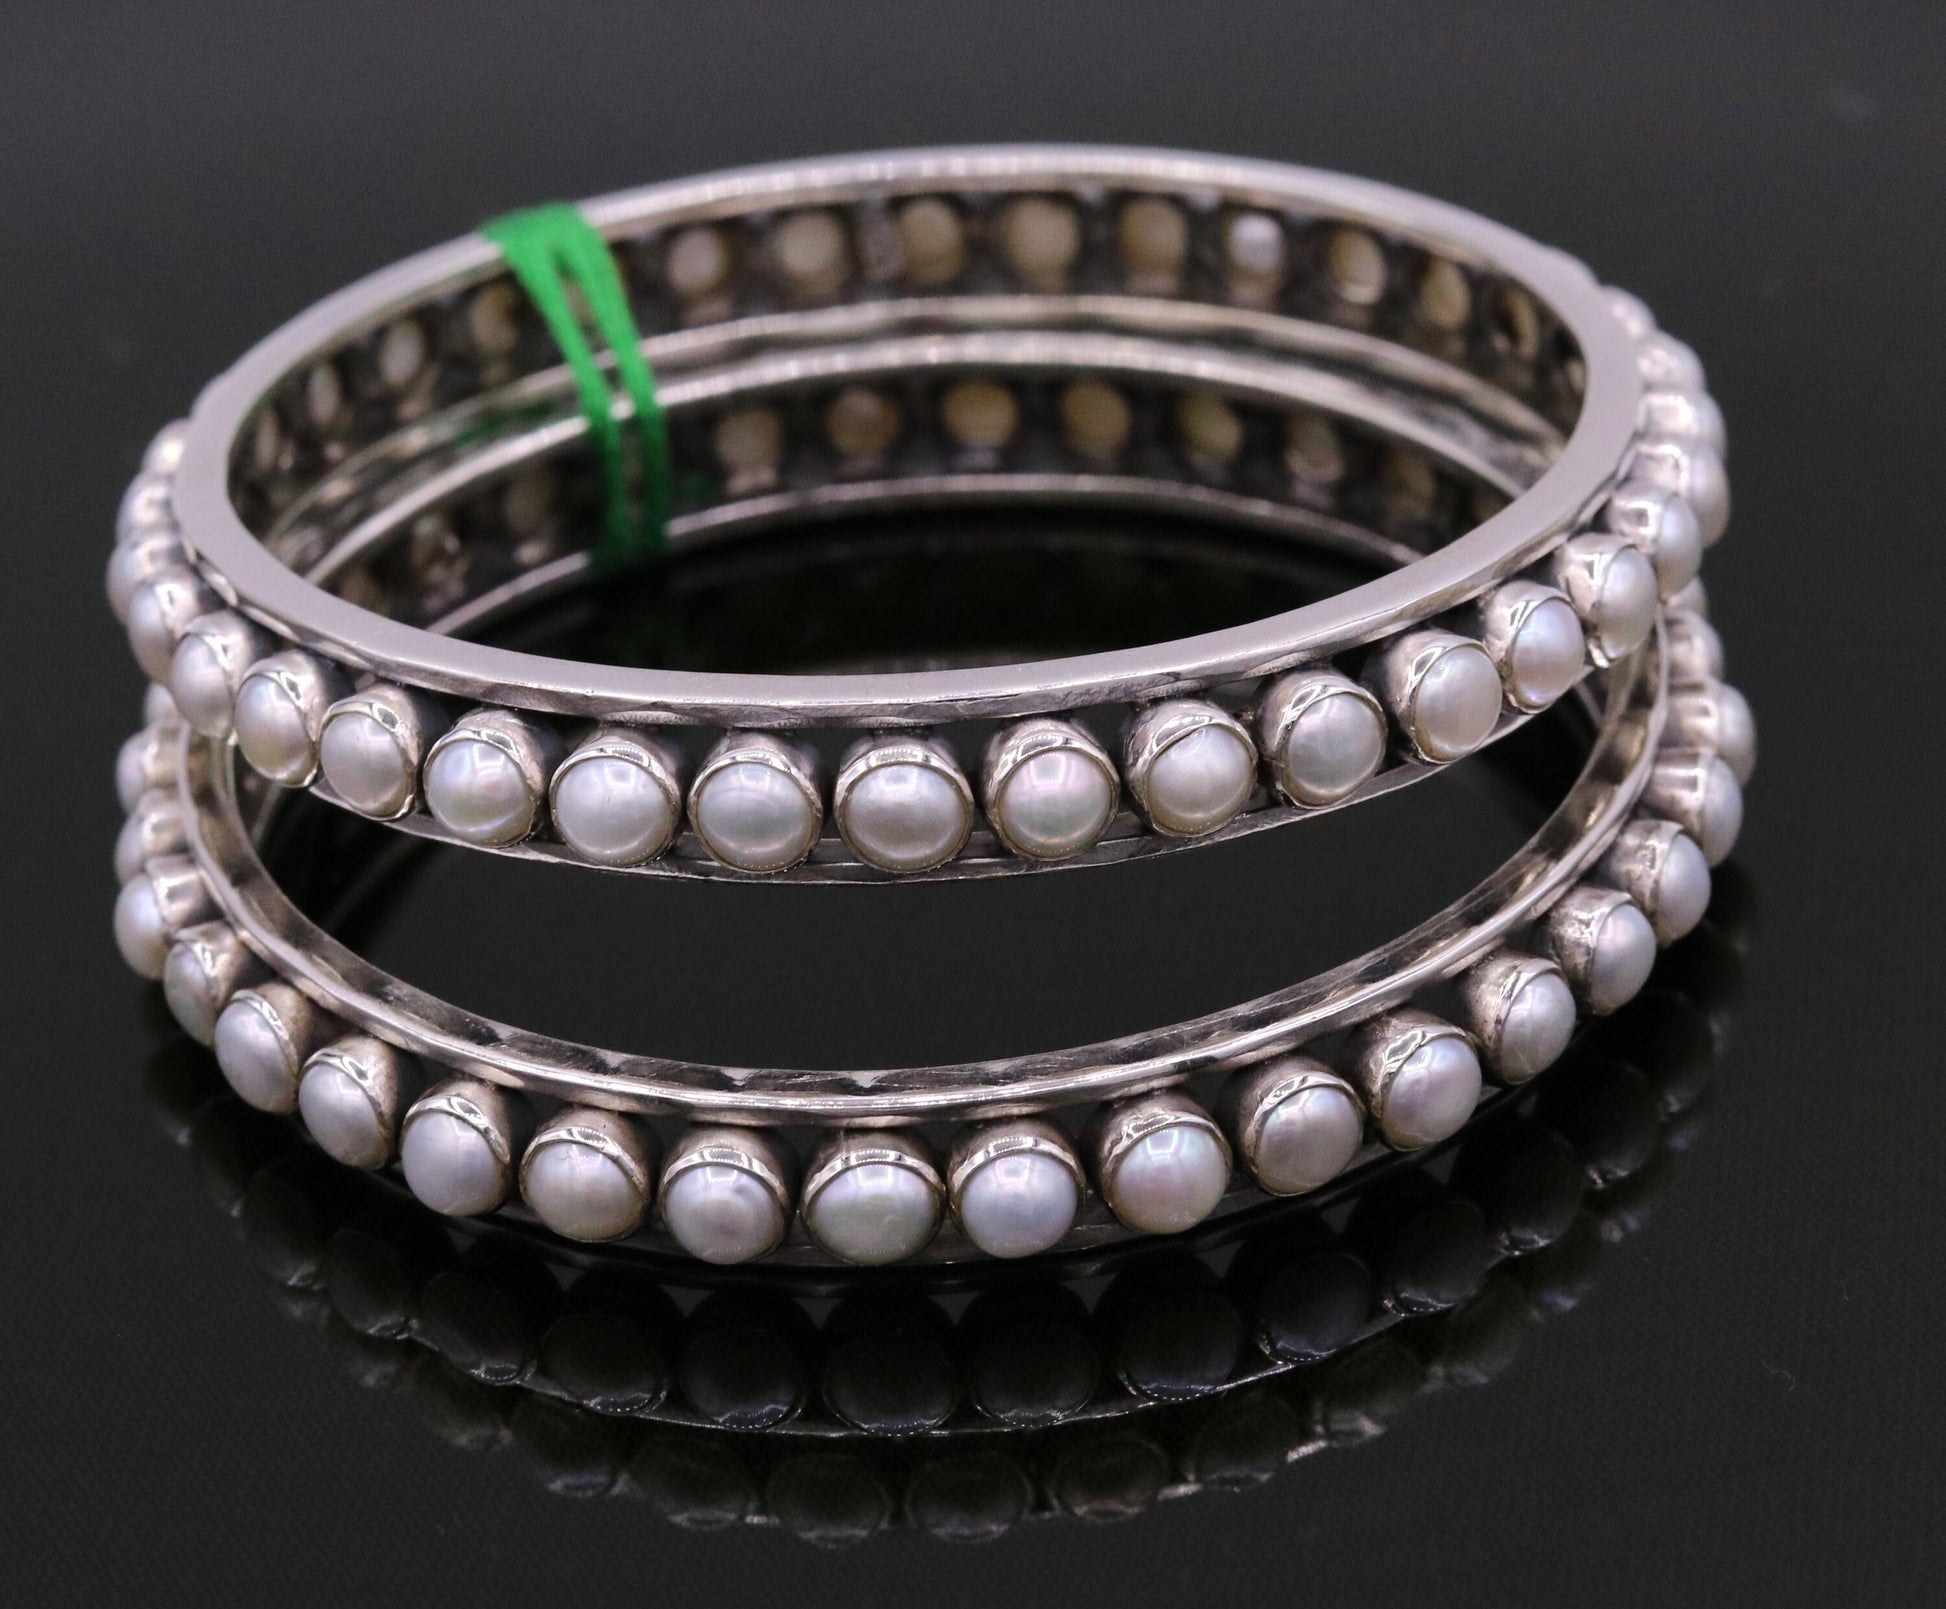 925 sterling silver handmade bangle bracelet kada, gorgeous natural pearl, amazing custom made excellent tribal bridal oxidized jewelry ba45 - TRIBAL ORNAMENTS